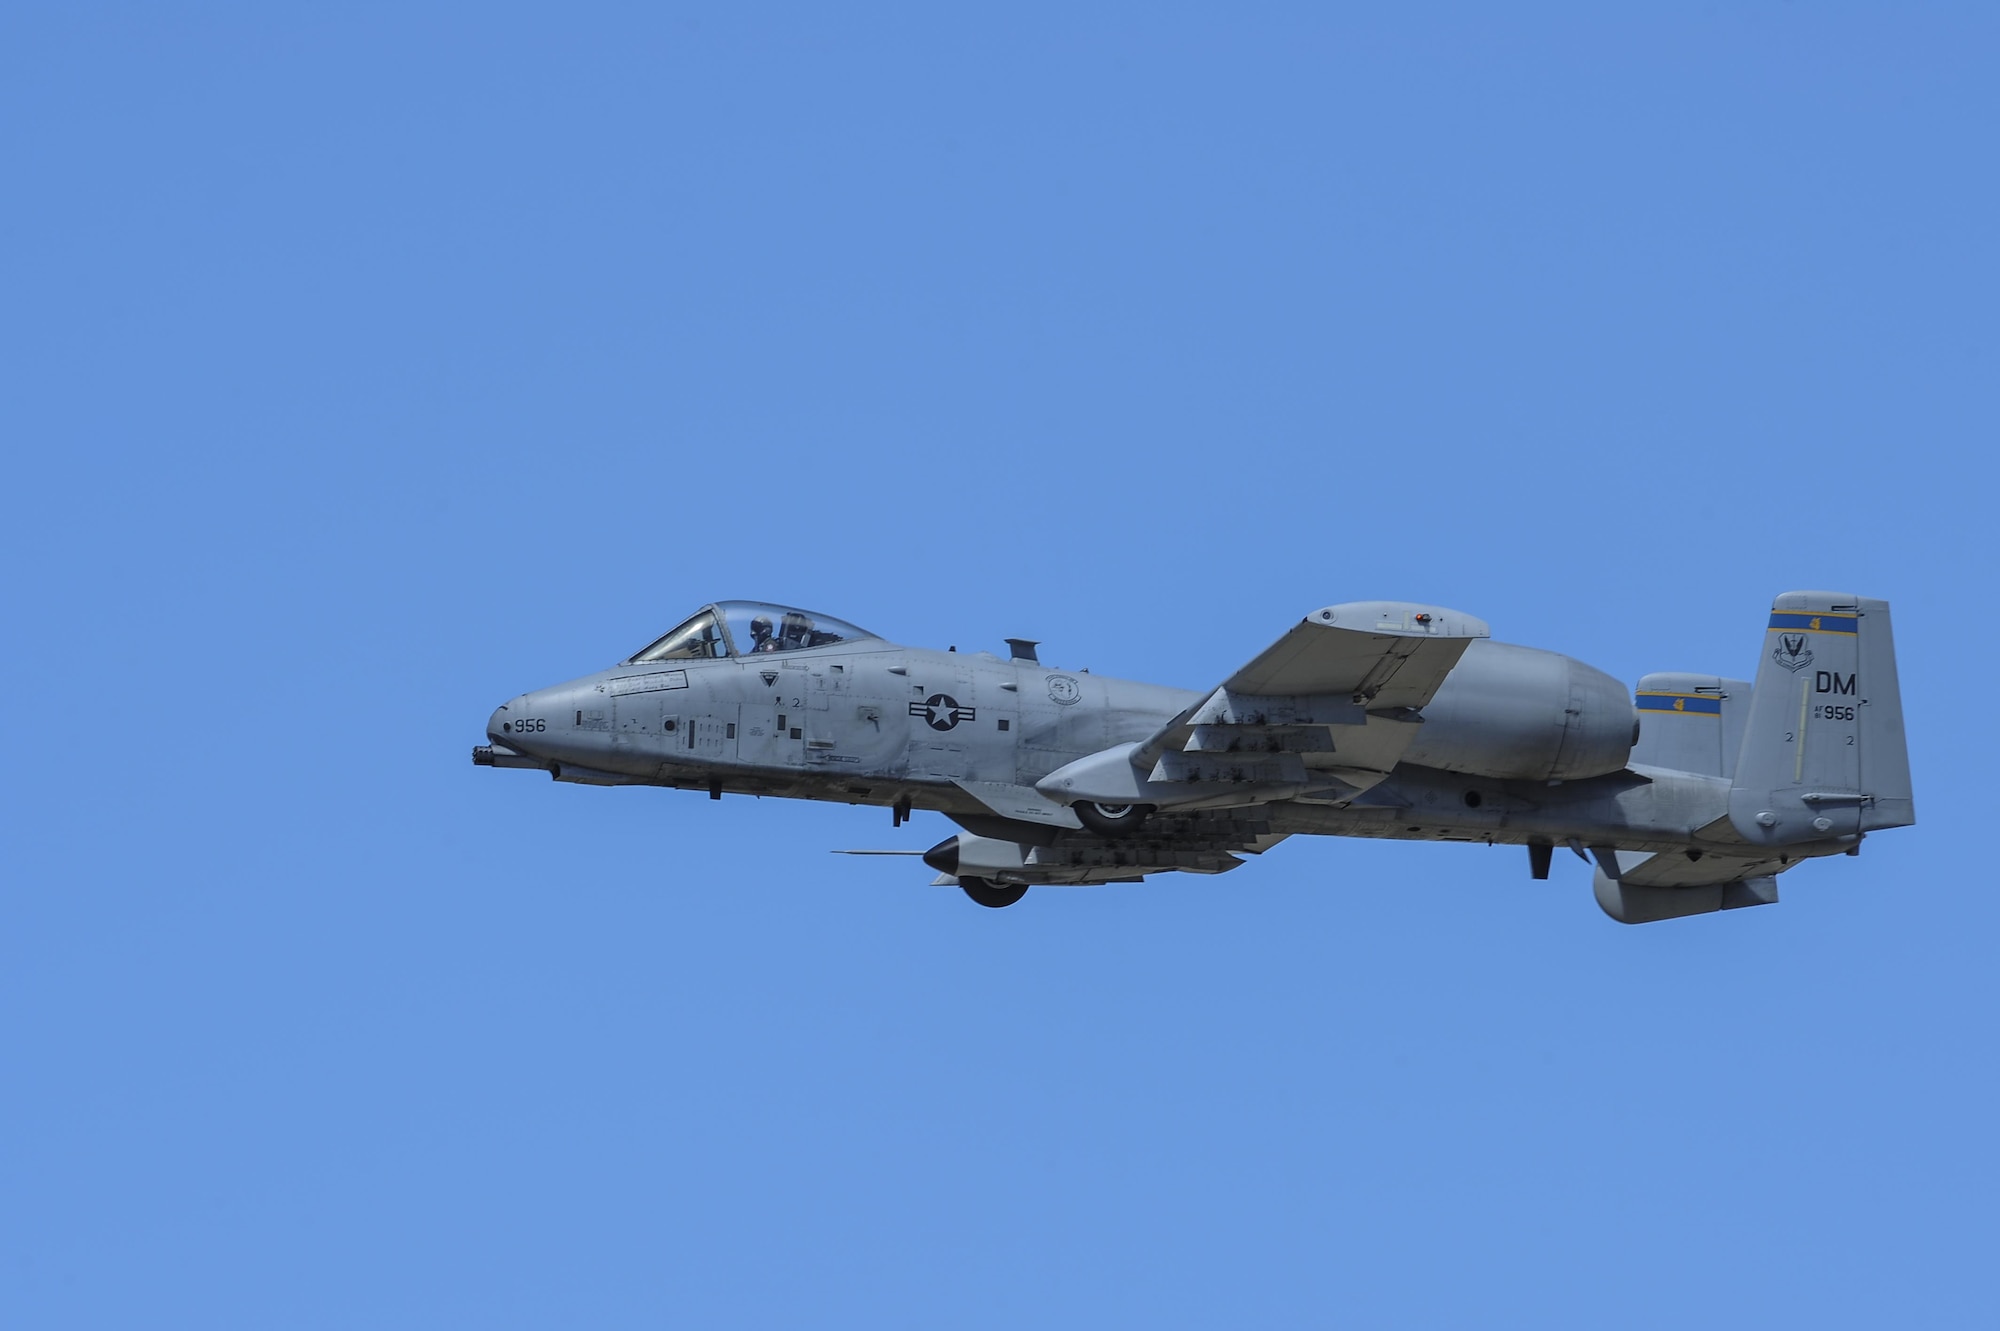 A U.S. Air Force A-10C Thunderbolt II from the A-10 West Heritage Flight Team performs during the Los Angeles County Air Show in Lancaster, Calif., March 26, 2017. The A-10 WHFT is scheduled to perform in 9 more air shows throughout the U.S. this year after resurging from a 5-year-long inactivation period. (U.S. Air Force photo by Airman 1st Class Mya M. Crosby)